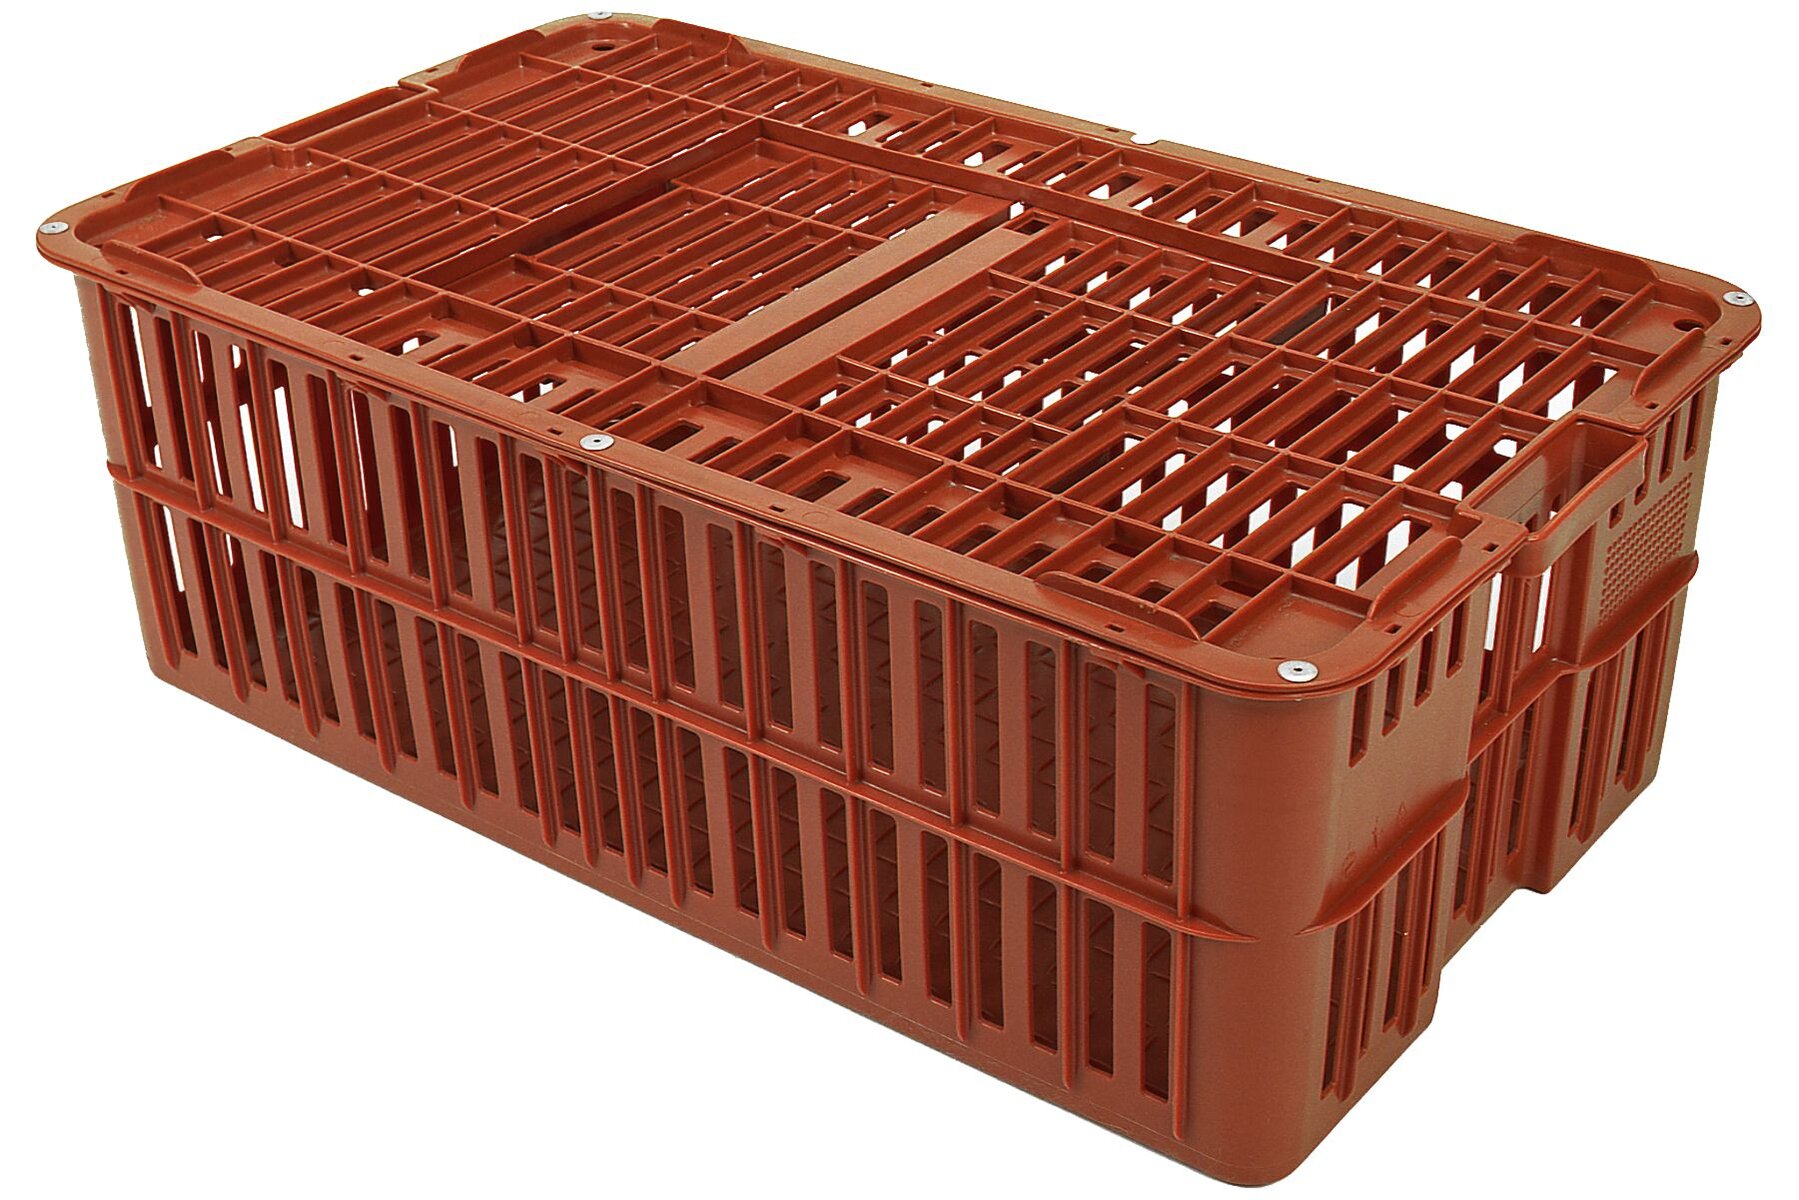 Poultry transport crate